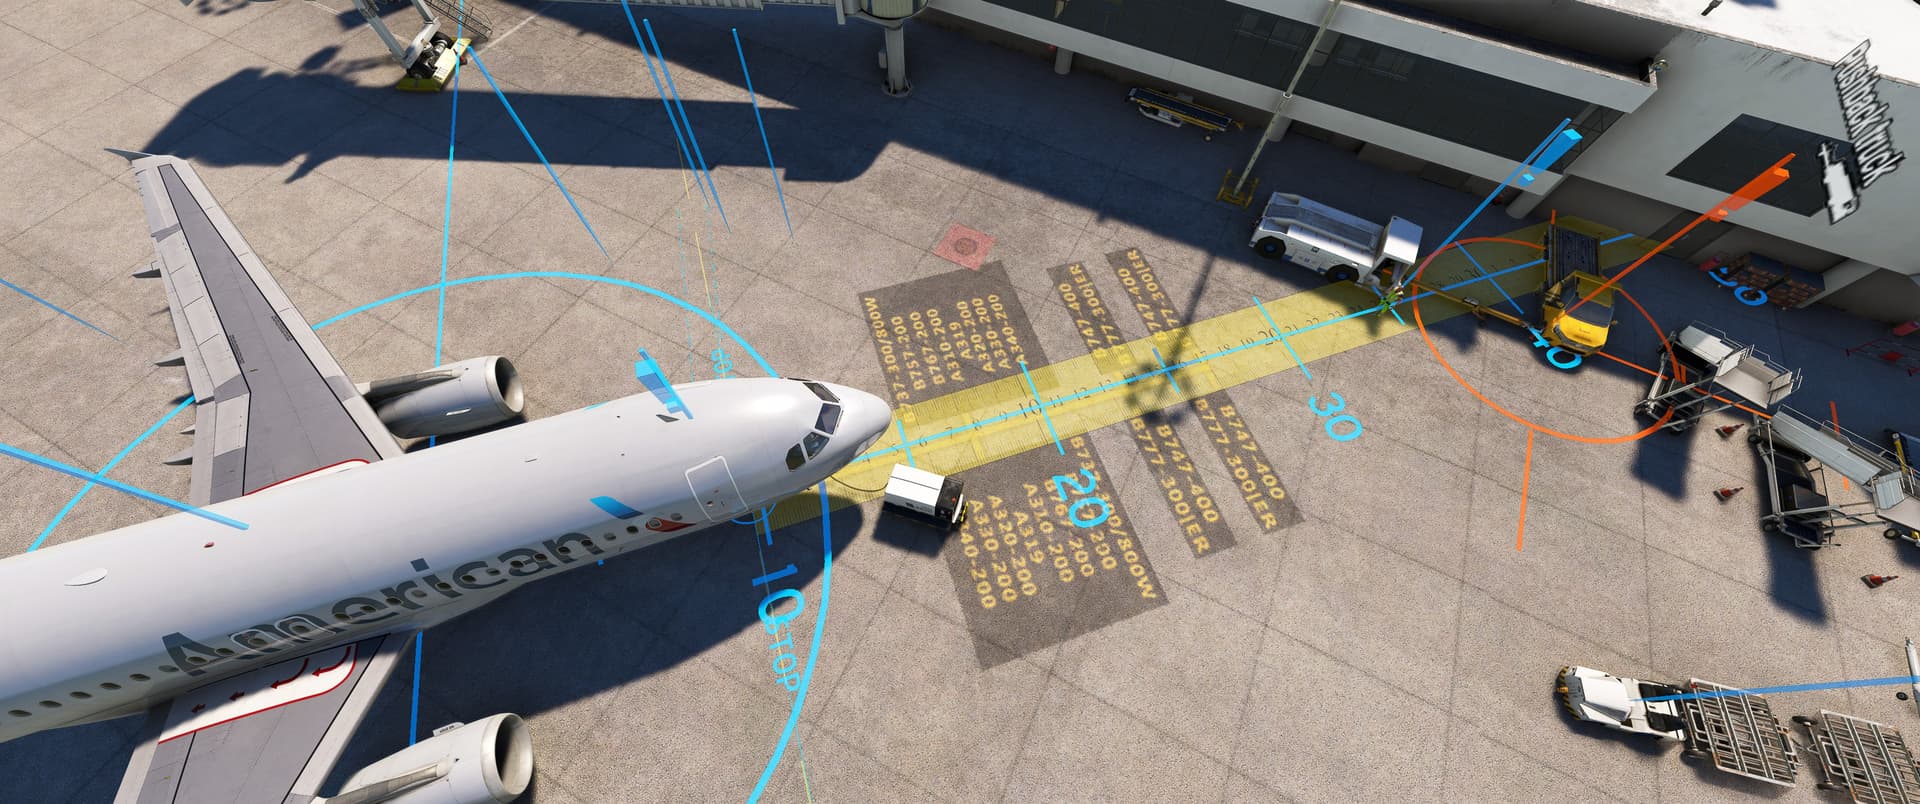 MDPP jetways not properly modelled - Scenery and Airports - Microsoft ...